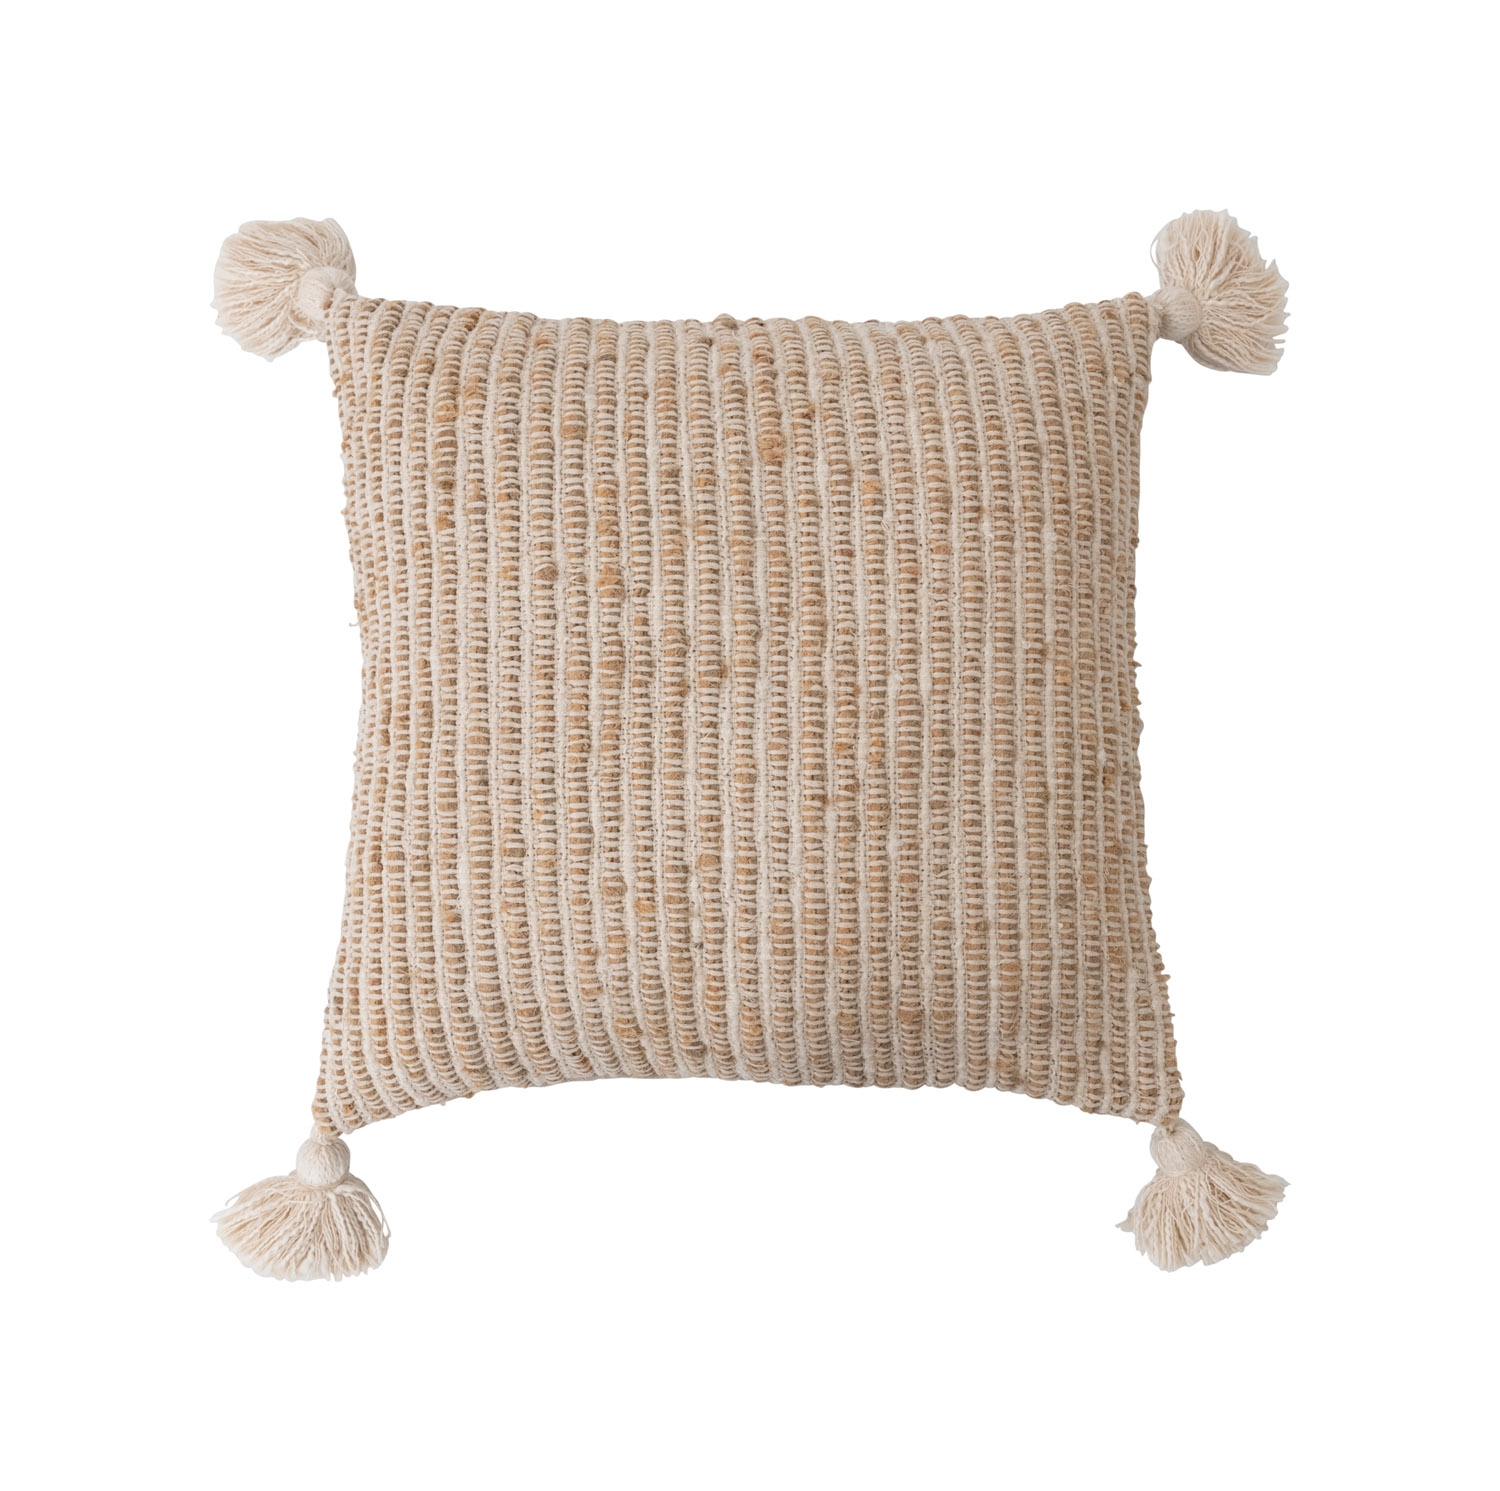 Woven Cotton Striped Pillow with Tassels - Image 0